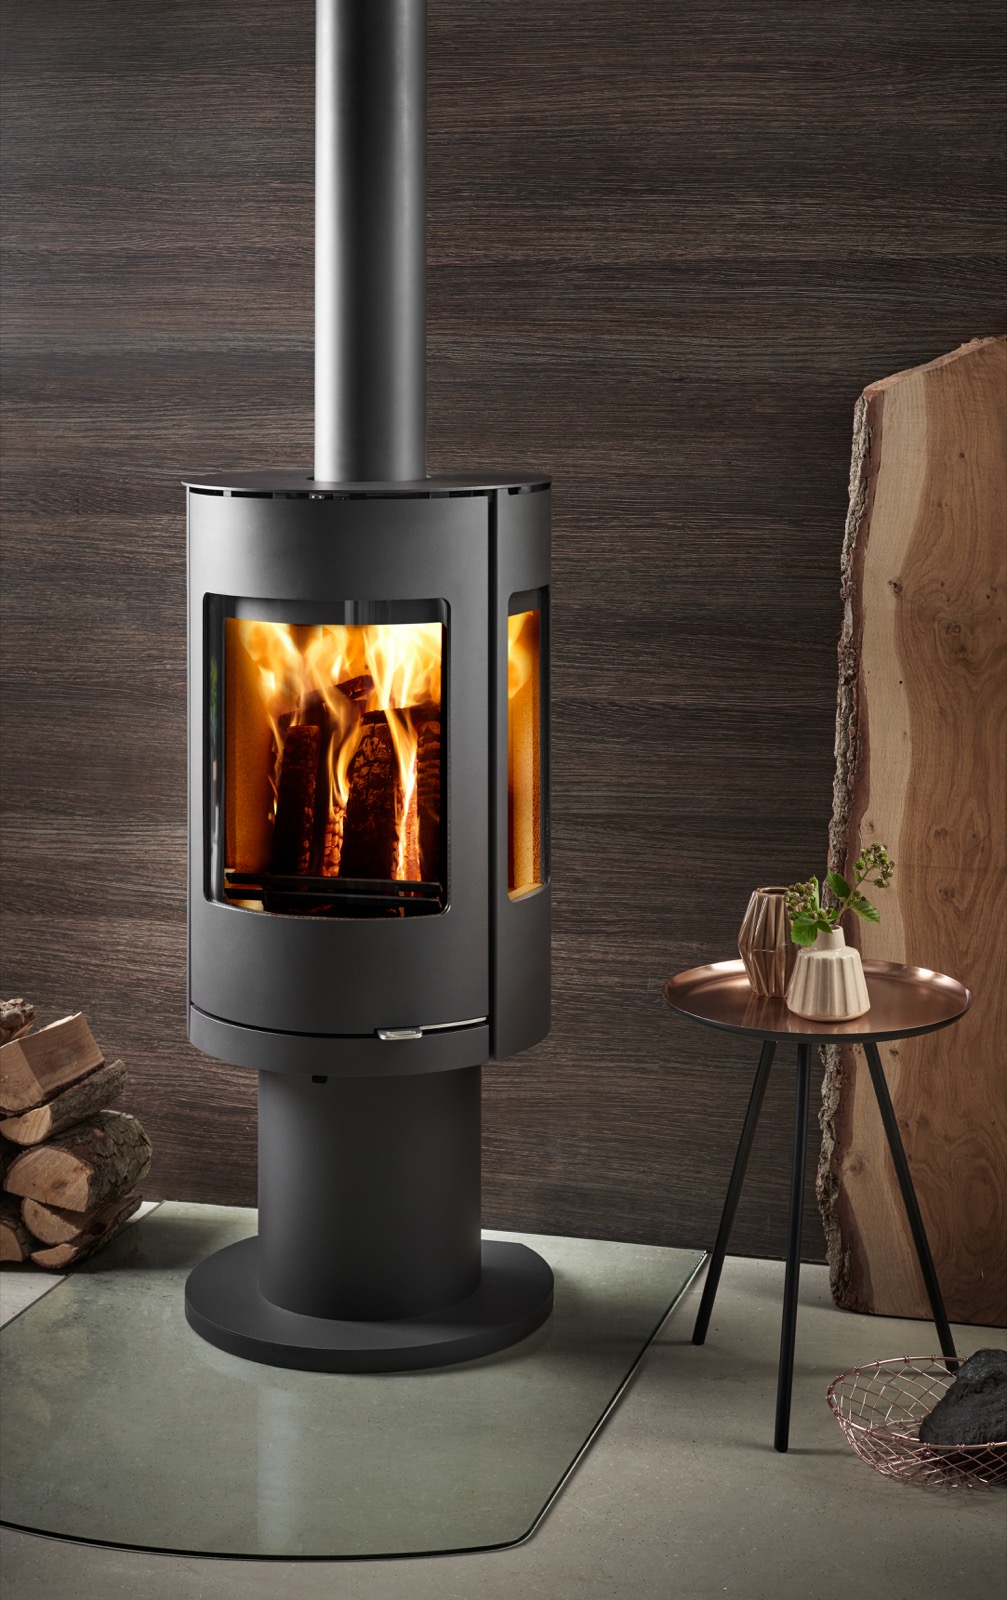 Westfire Uniq 37 Pedestal One Convection Wood Burning Stove with Closed Combustion Adapter